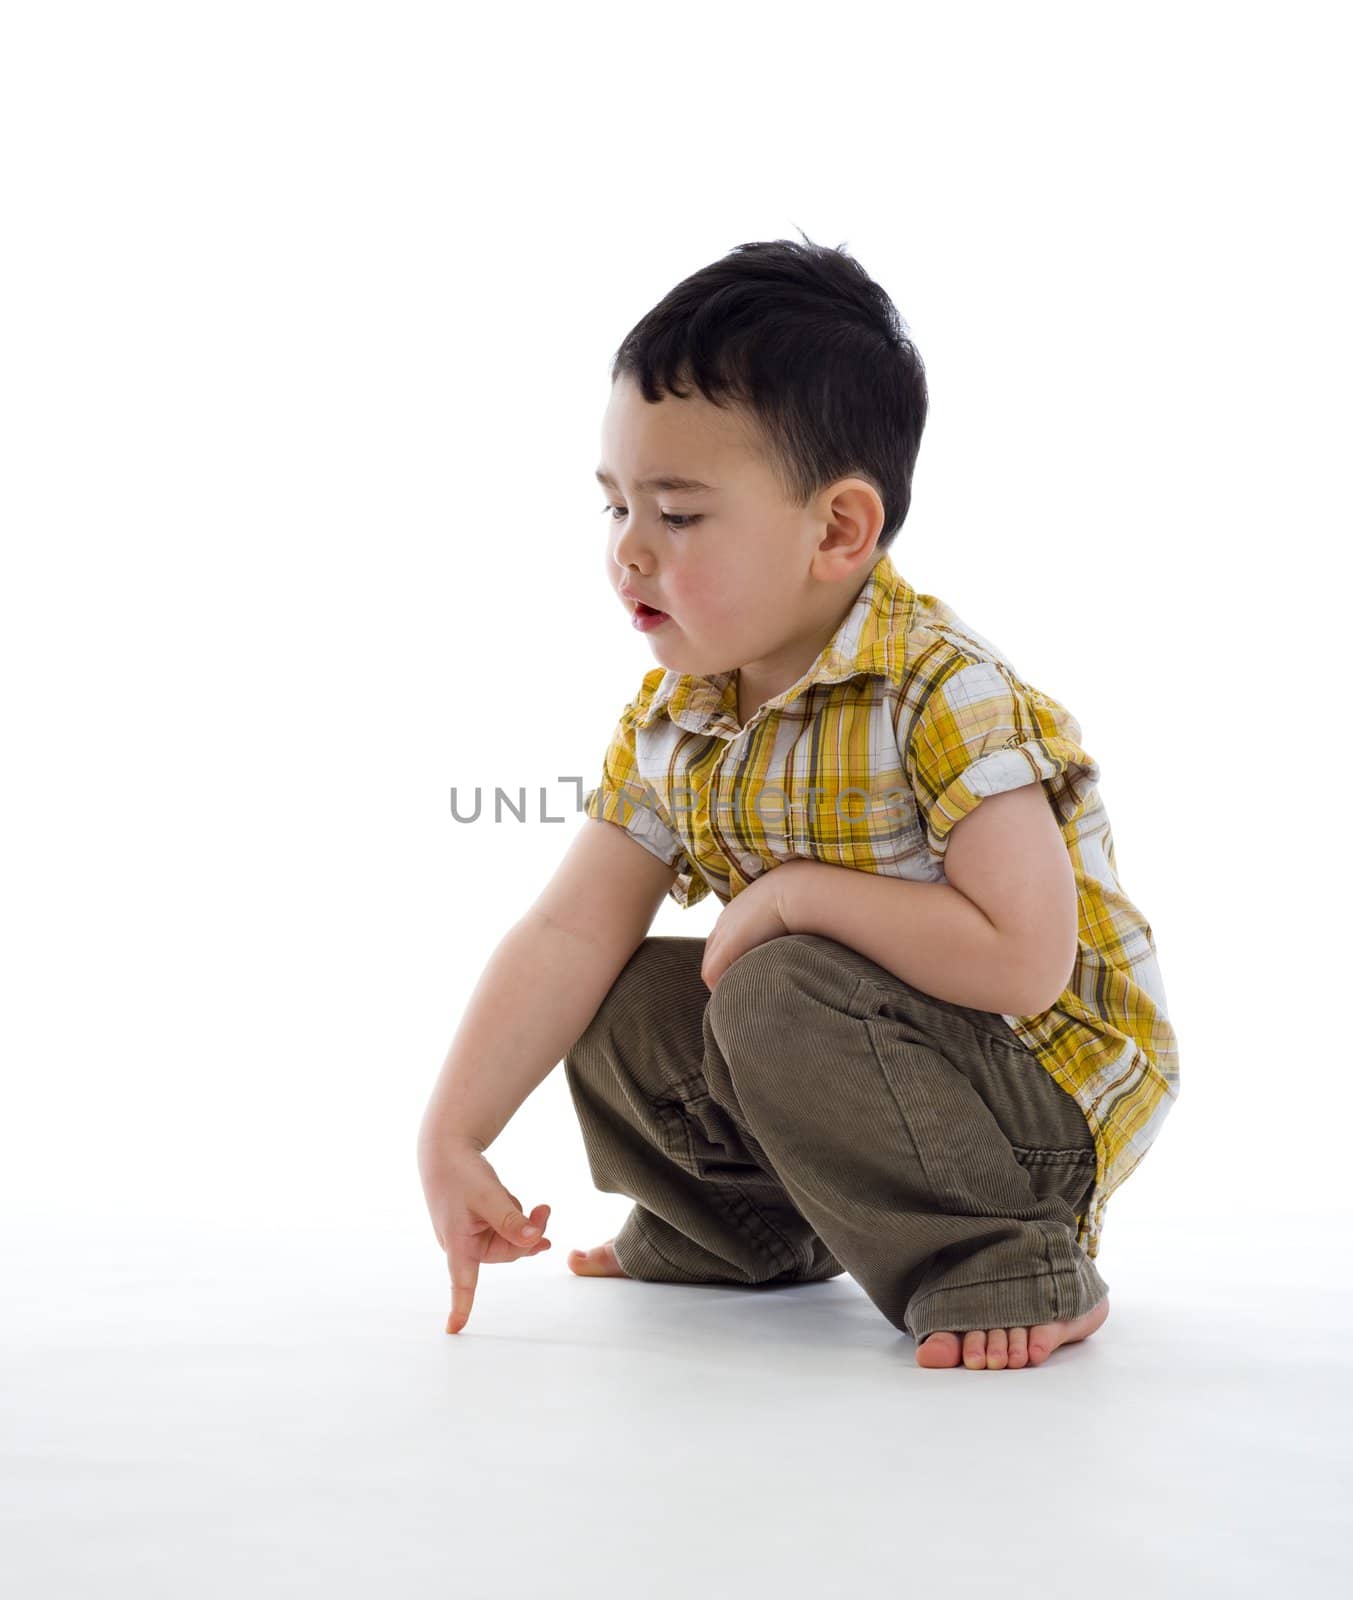 small boy pointing at something, isolated on white